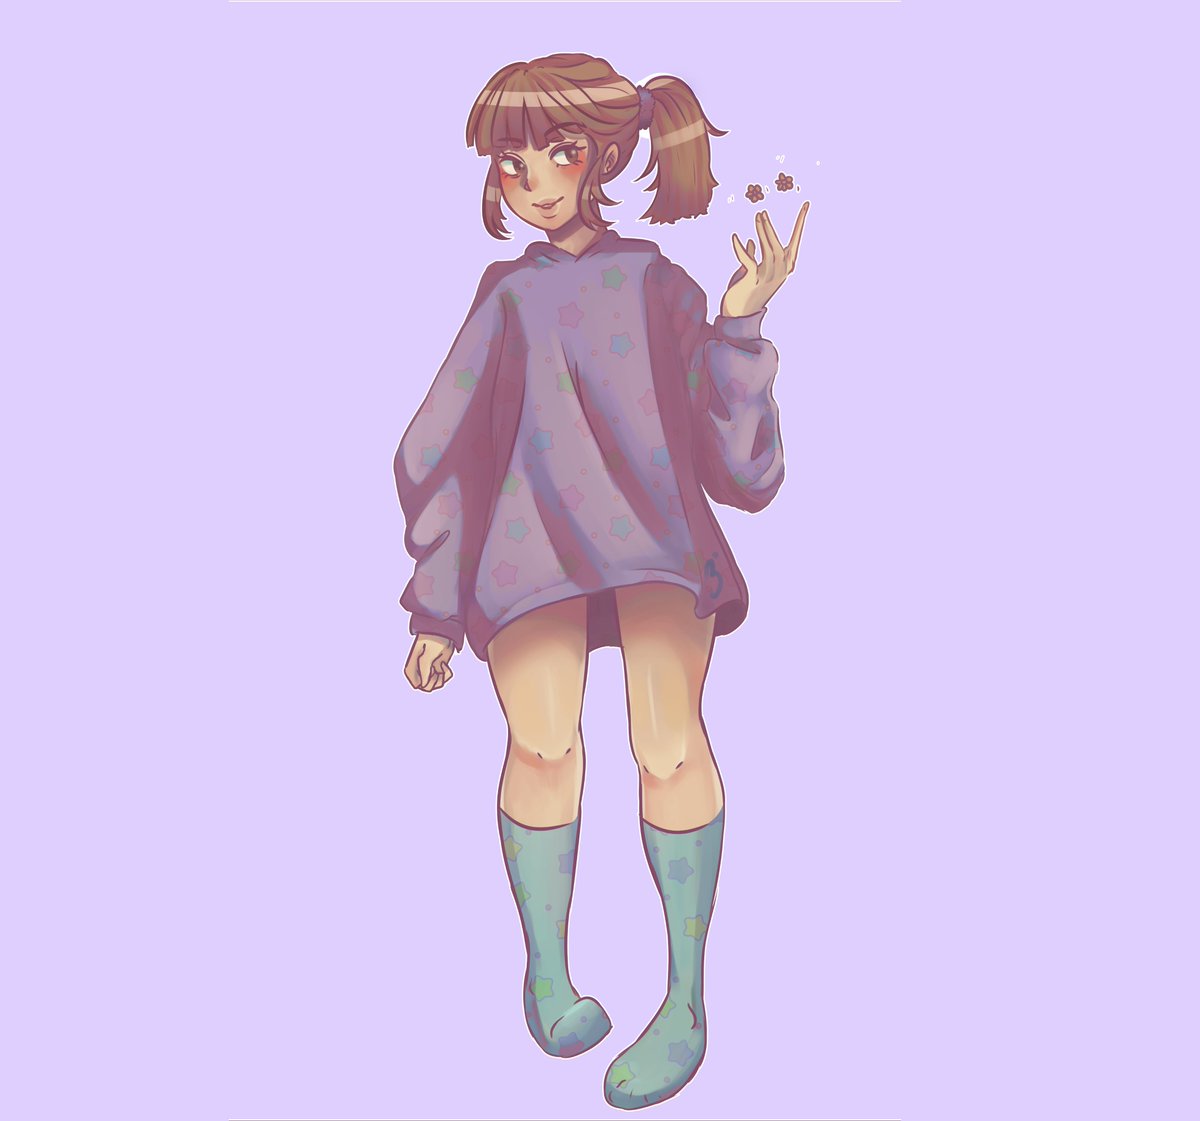 imagine being a digital artist and having to post the same image 19210210 times to different social platforms. It be rough.

#art #update #artist #anime #hoodie #Purple #flowers #wip #digitalart #socks #highcut #stars #arttipsandtricks #animeromance #wisewordsoftheday